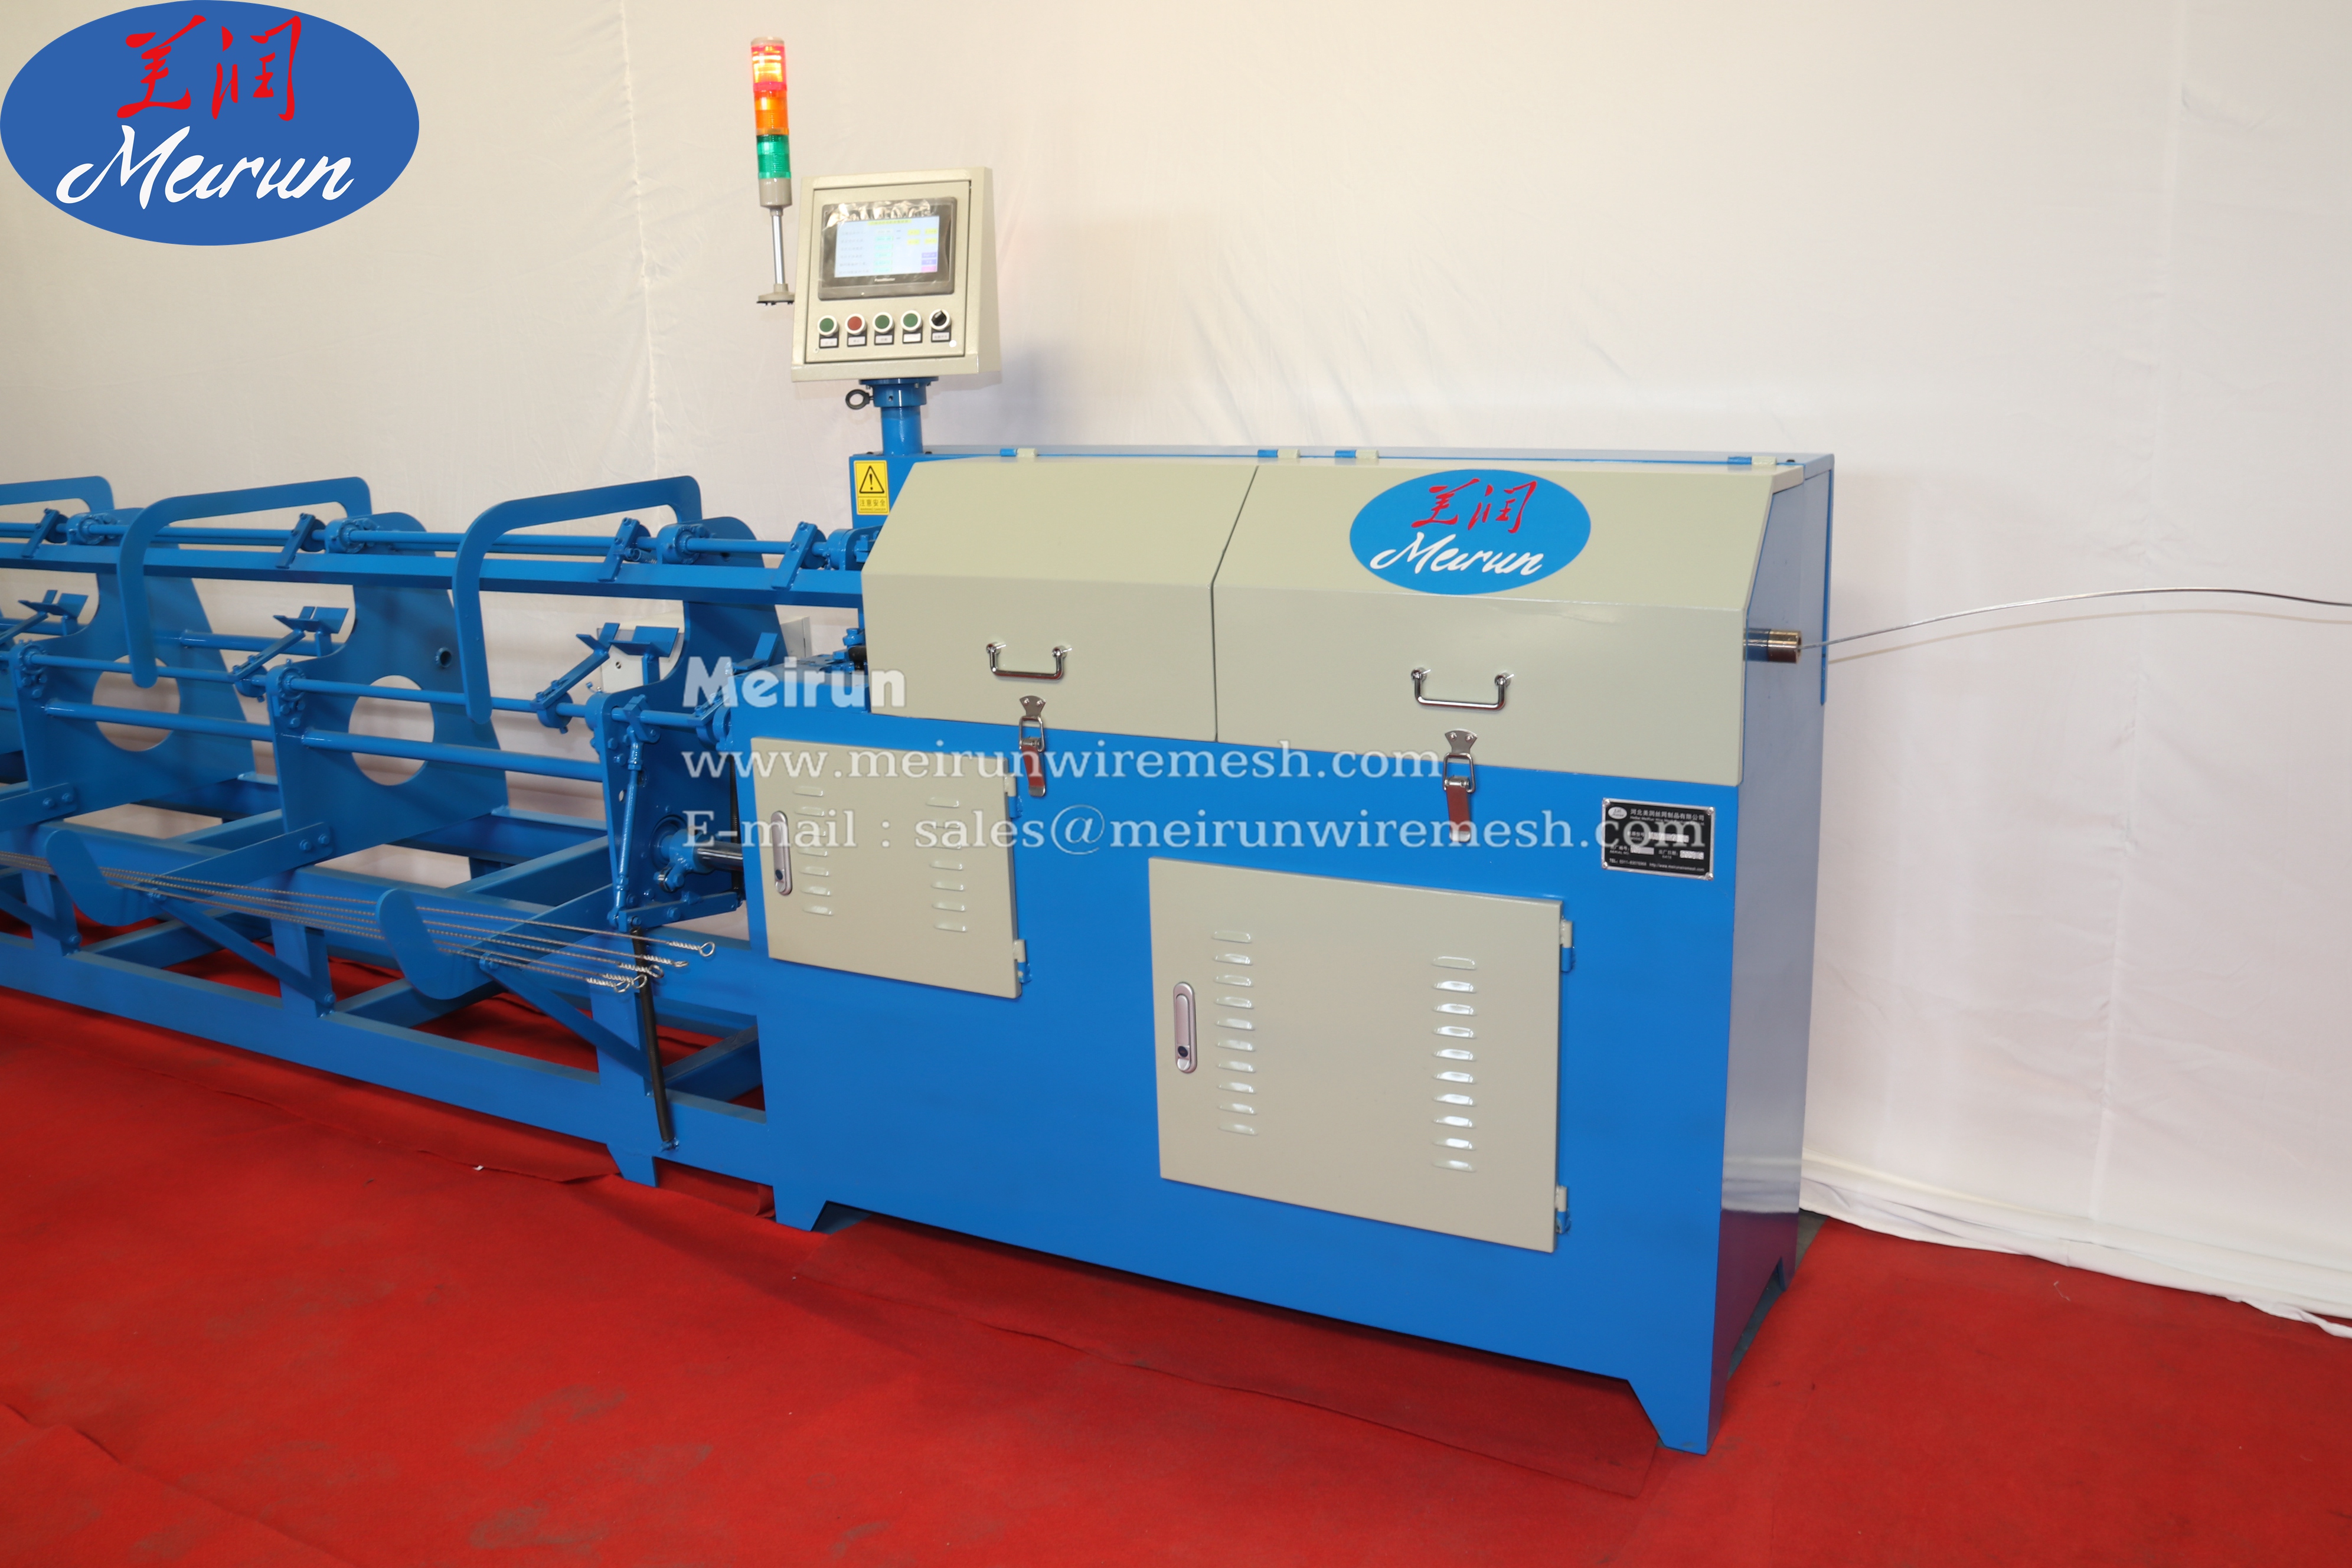 Pvc Coated High Output Single Loop Wire Making Machine 